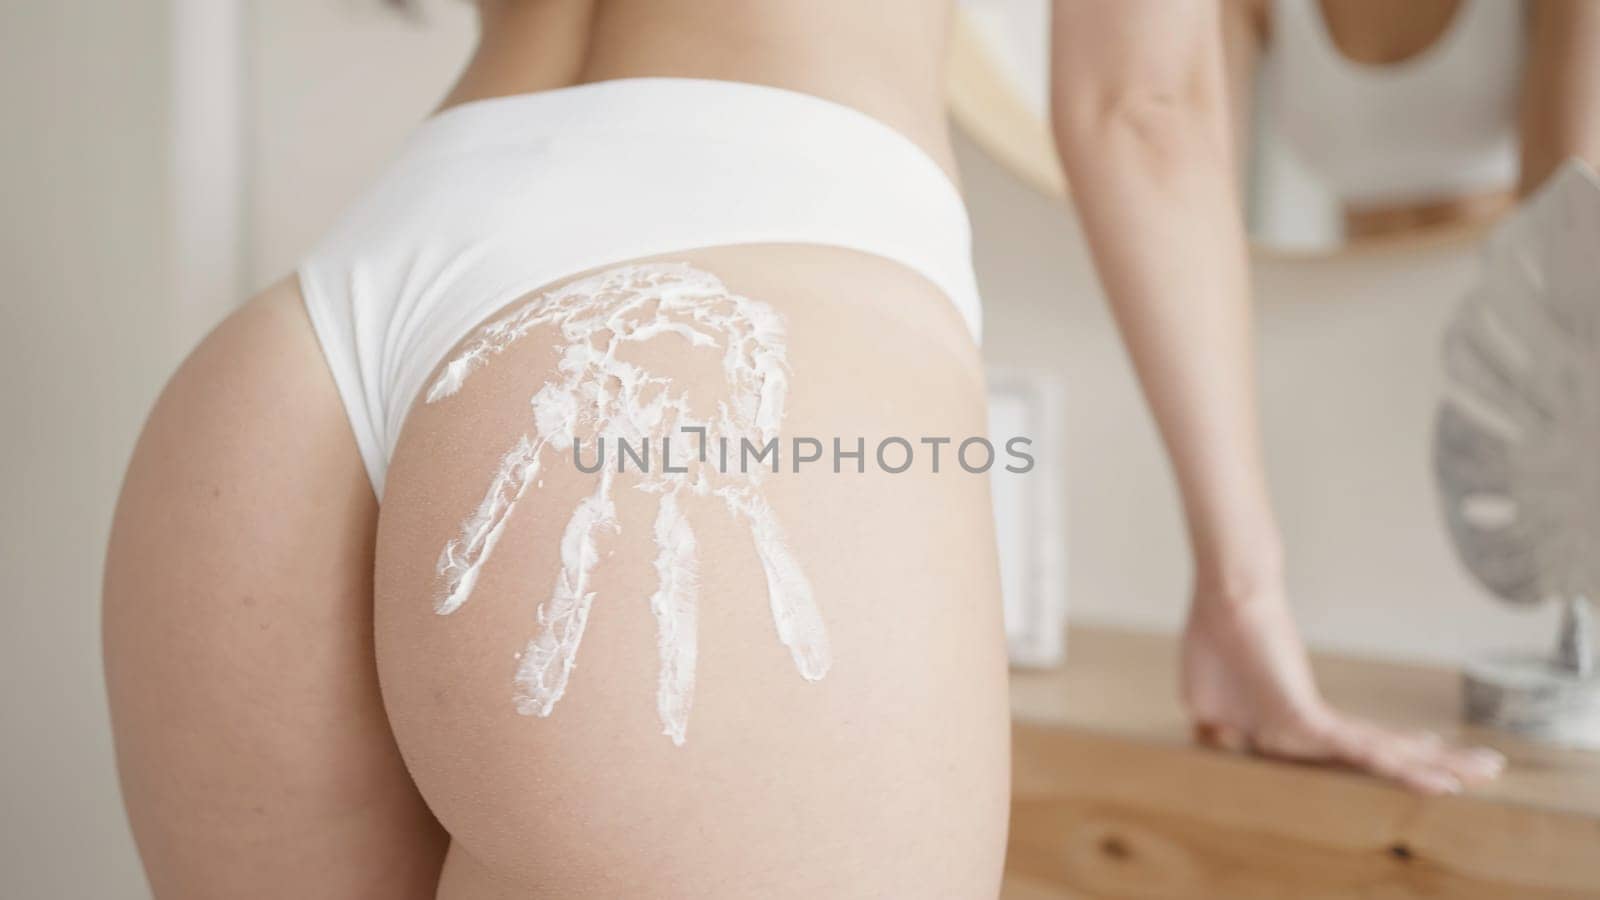 Sexy handprint on woman. Action. Close-up of sexy body of young woman in bright room. Beautiful ass of woman with sexy imprint.